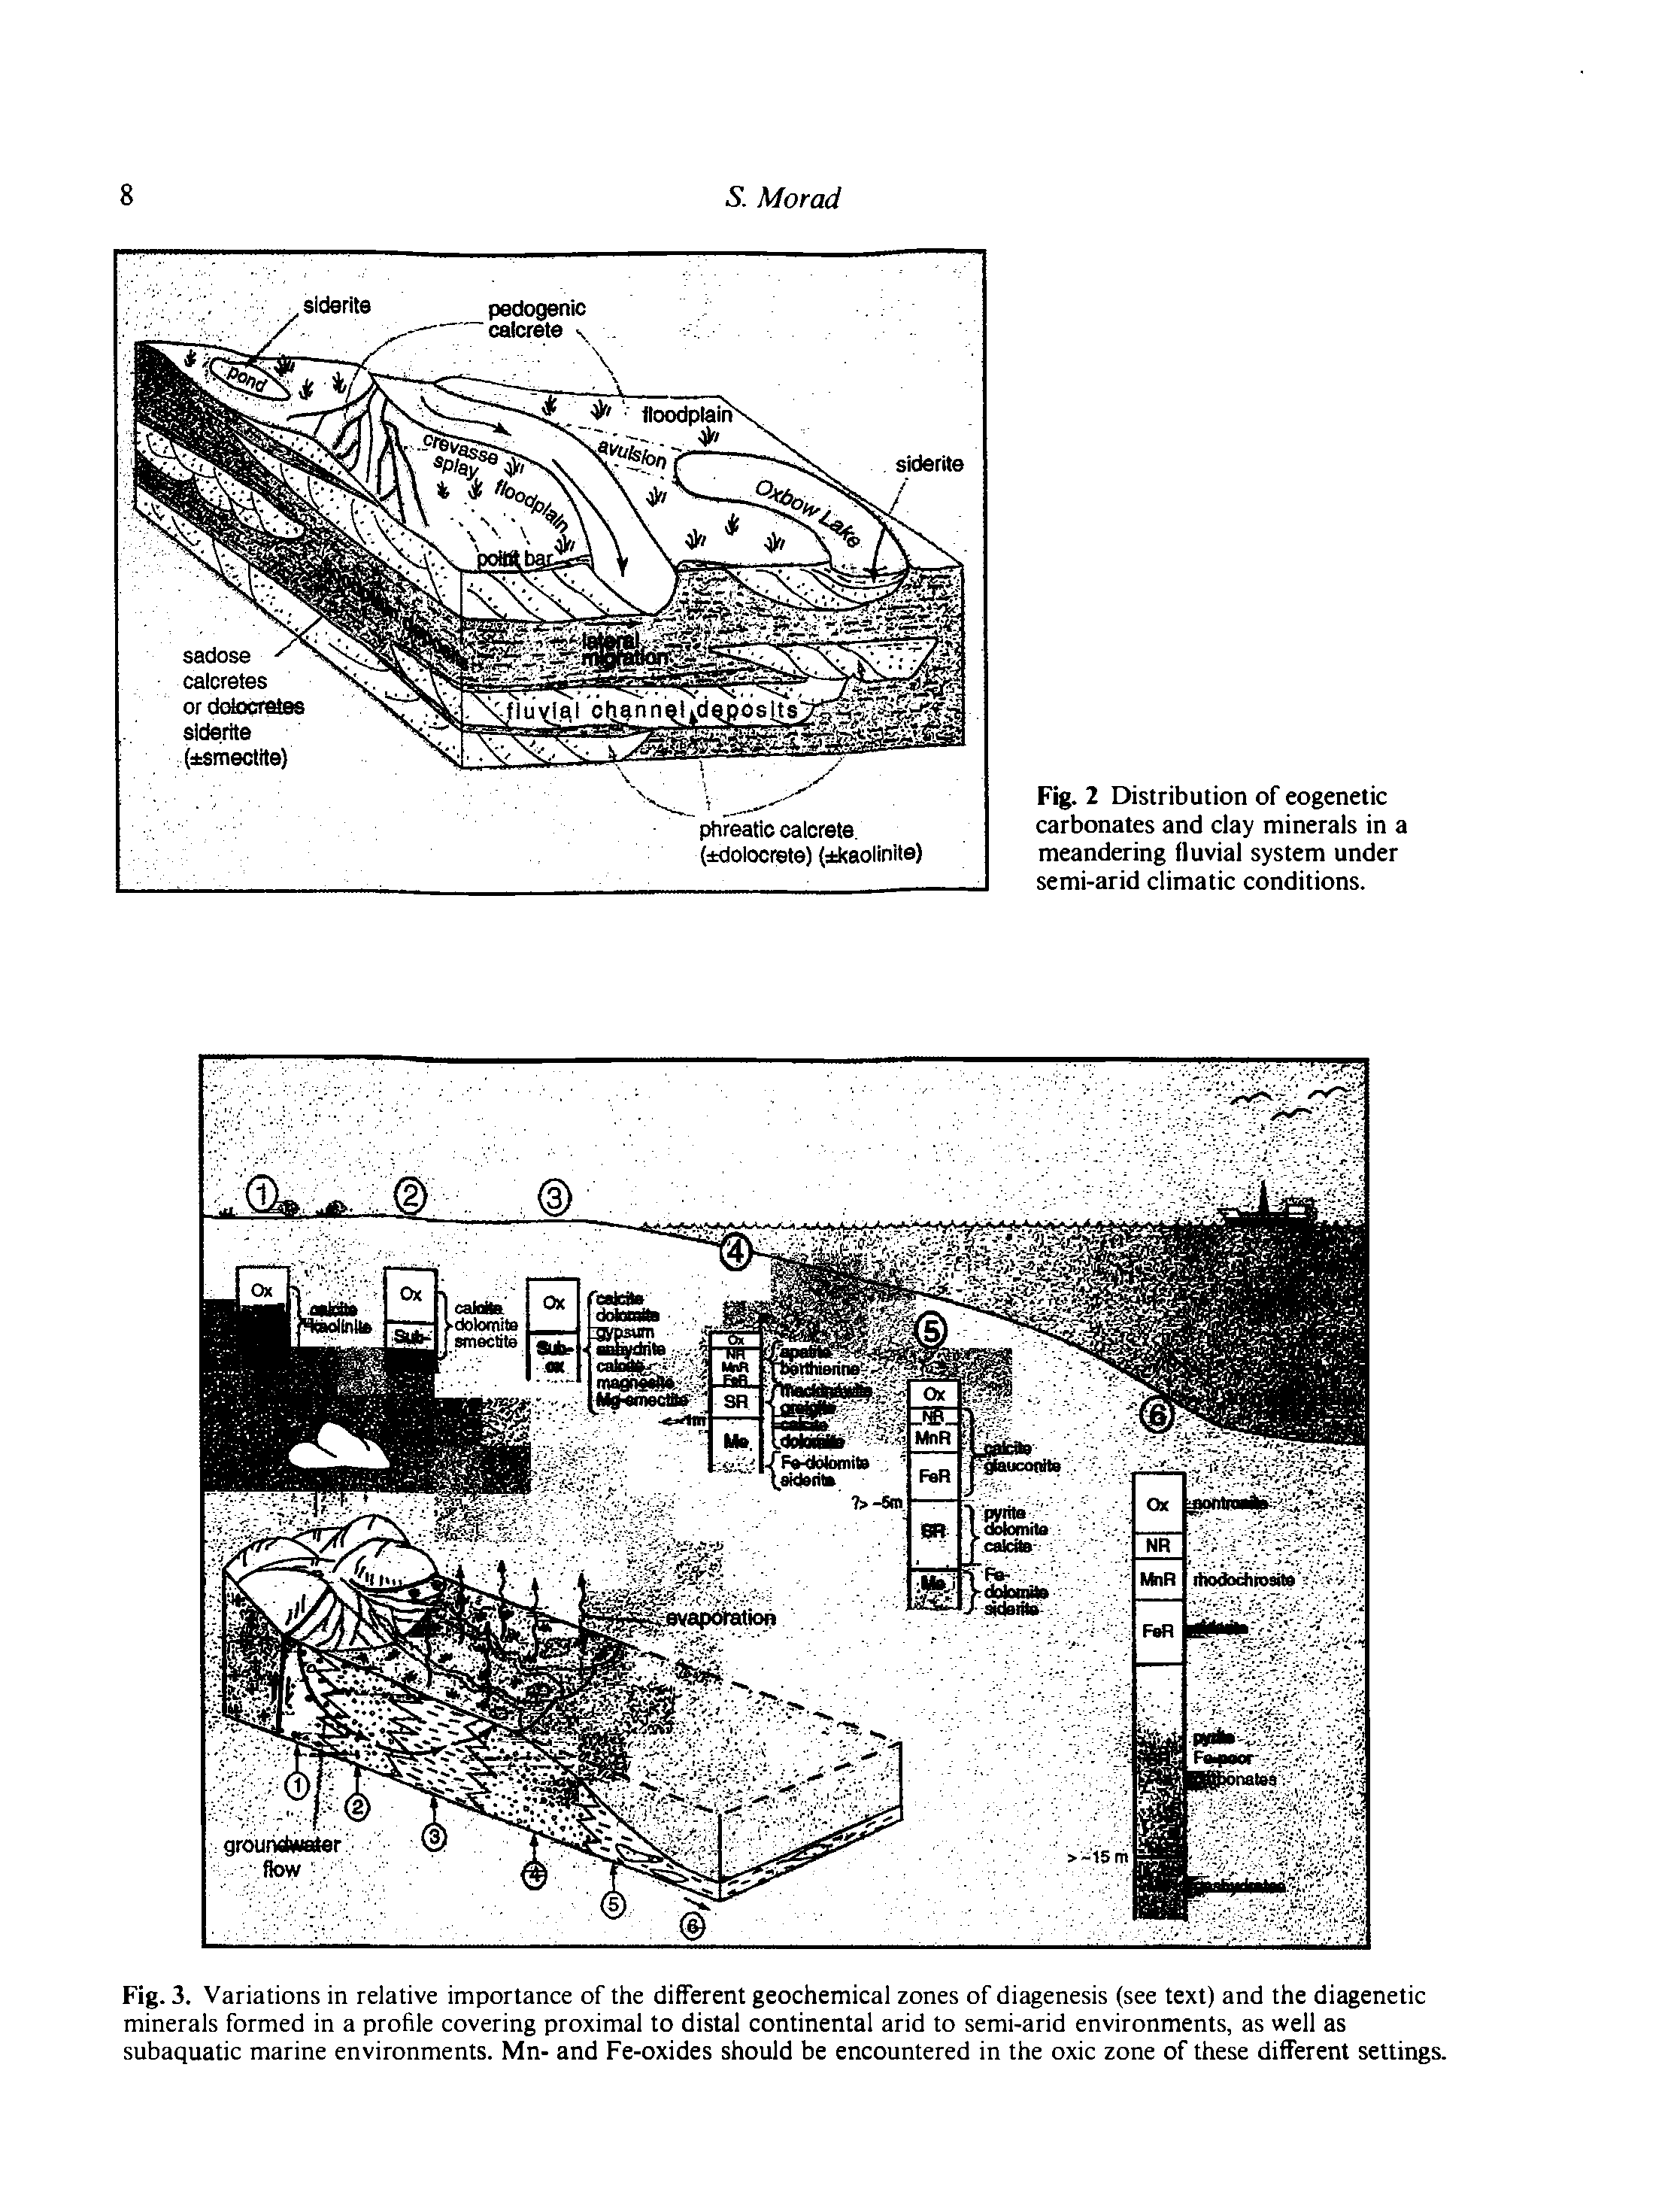 Fig. 3. Variations in relative importance of the different geochemical zones of diagenesis (see text) and the diagenetic minerals formed in a profile covering proximal to distal continental arid to semi-arid environments, as well as subaquatic marine environments. Mn- and Fe-oxides should be encountered in the oxic zone of these different settings.